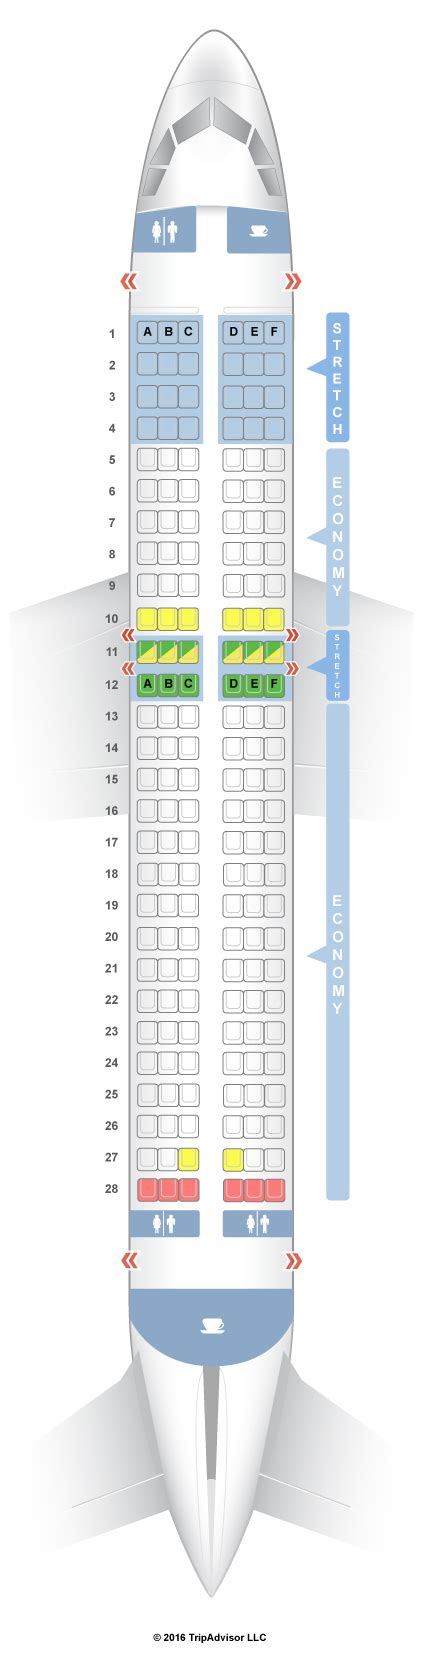 For your next Frontier flight, use this seating chart to get the most comfortable seats, ... Airbus A320 (320) Layout 1; Airbus A320 (320) Layout 2; Airbus A321 (321). 